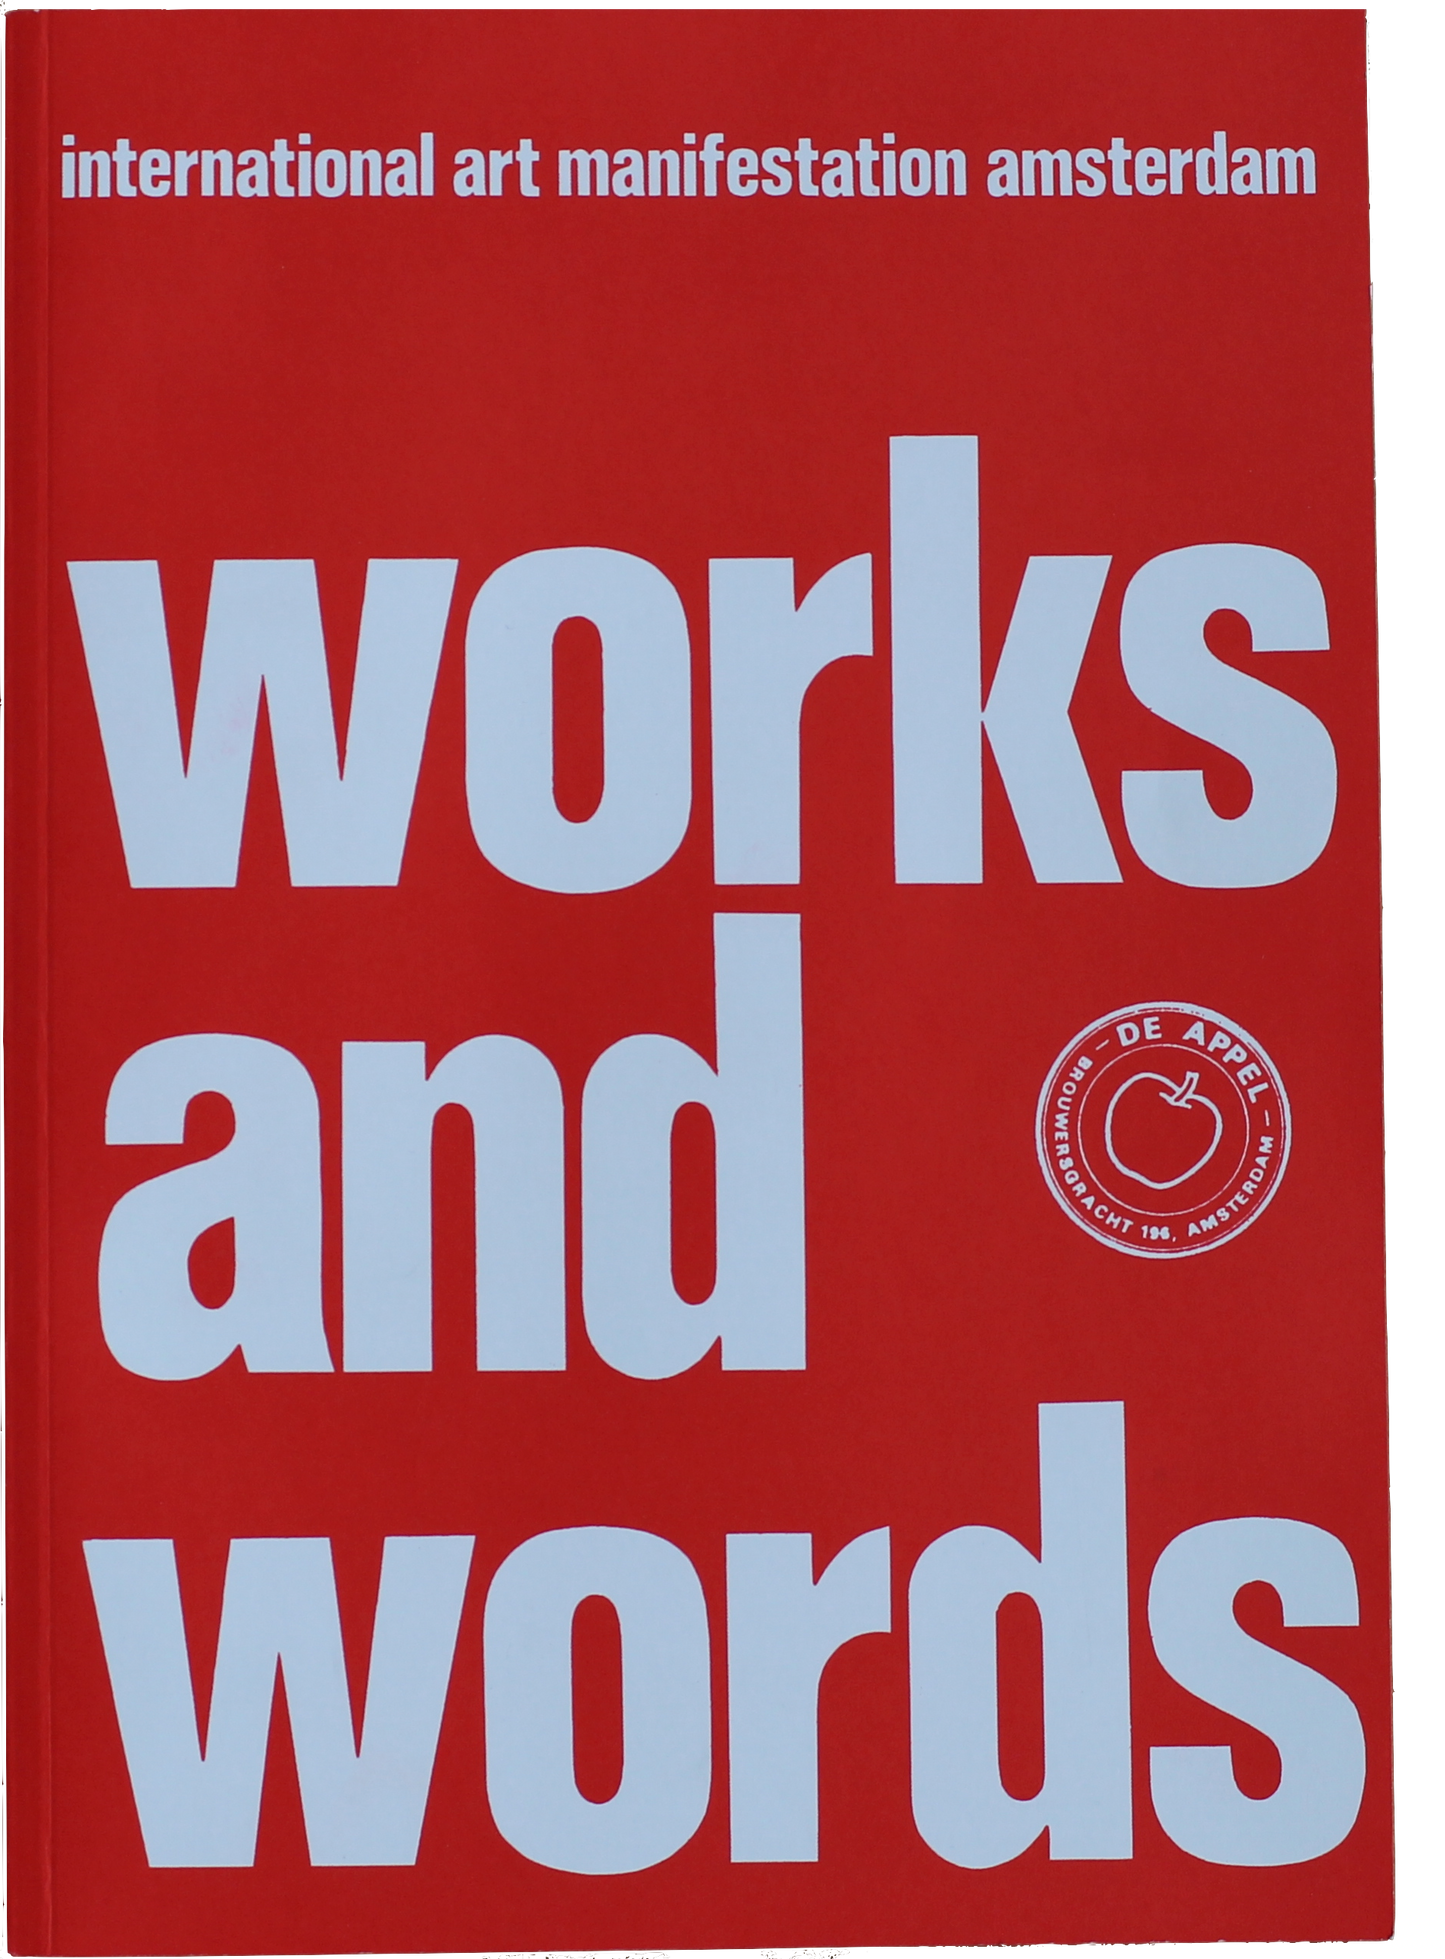 Works and Words